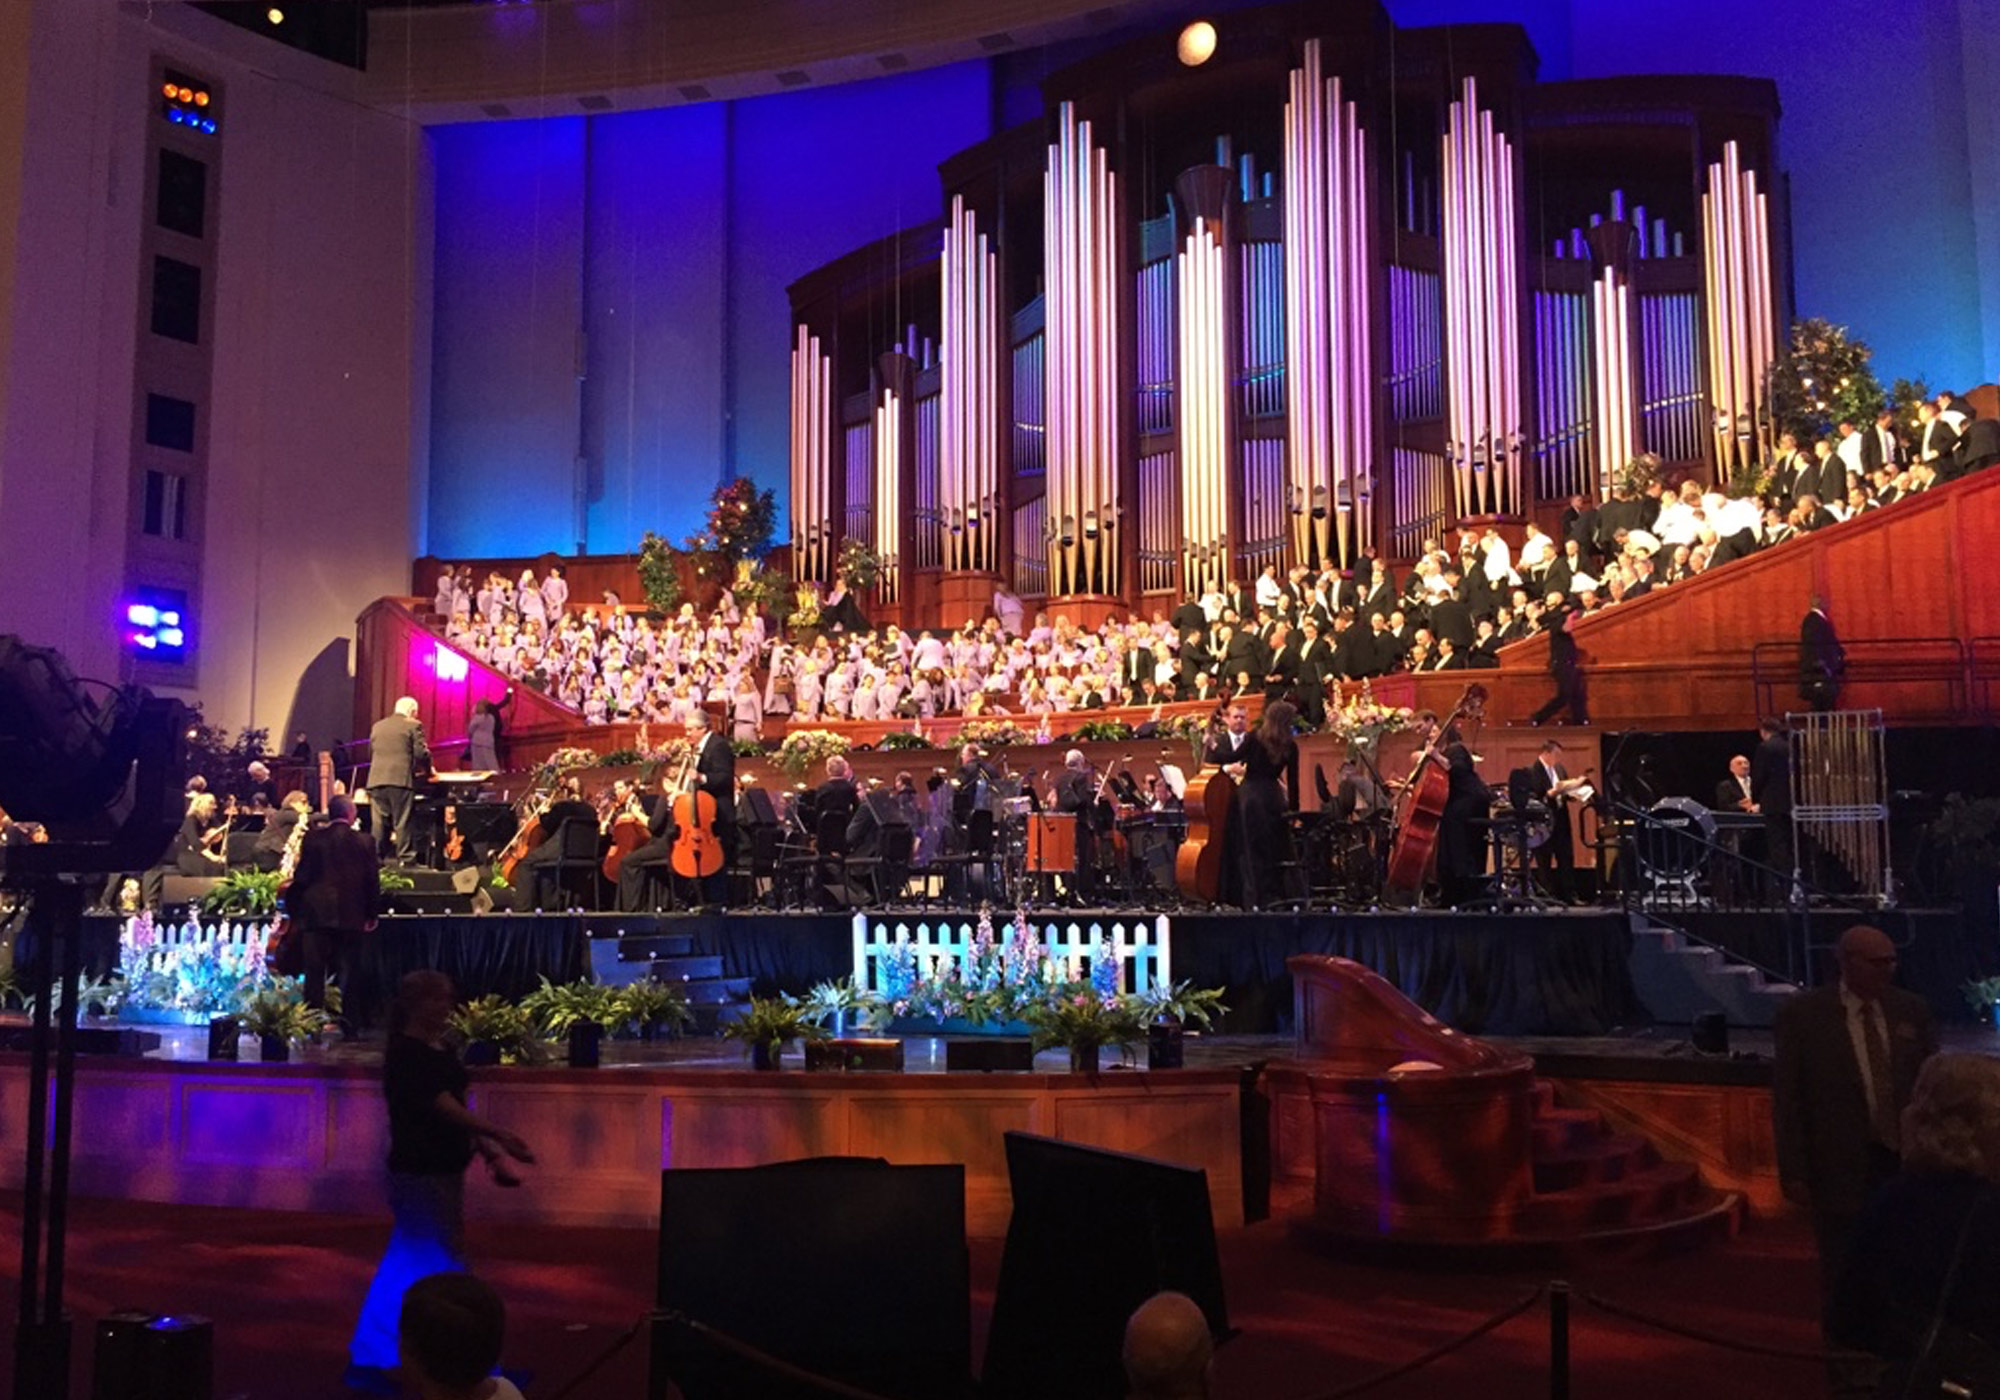 The Tabernacle Choir at Temple Square performance wrapping up.